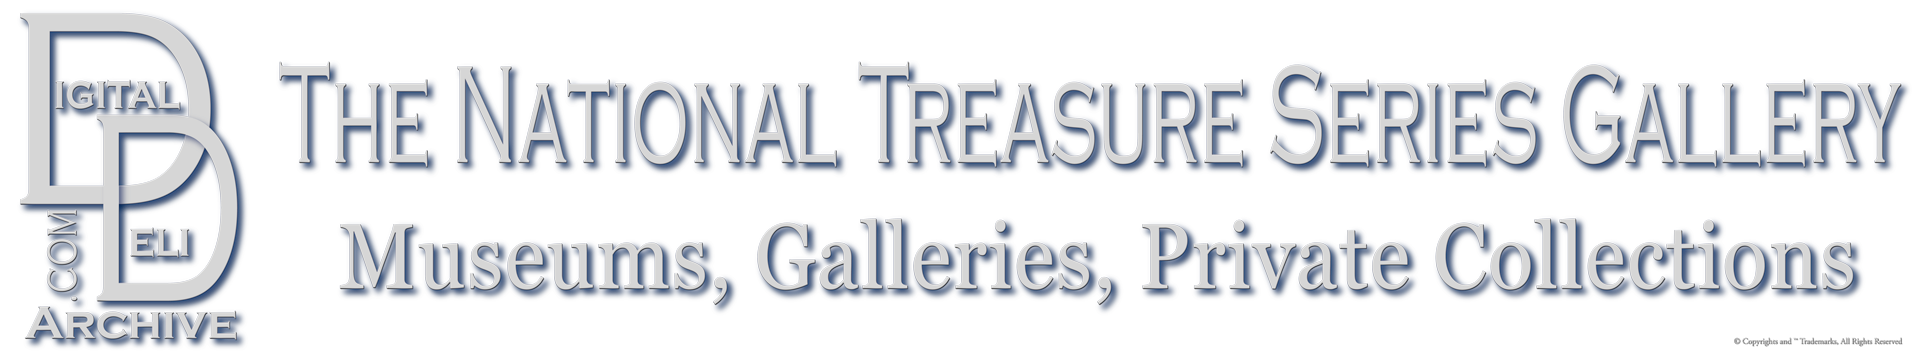 DigitalDeliArchive.com Properties & Brands Imprint, The National Treasure Series Gallery, Museums, Galleries, Private Collections